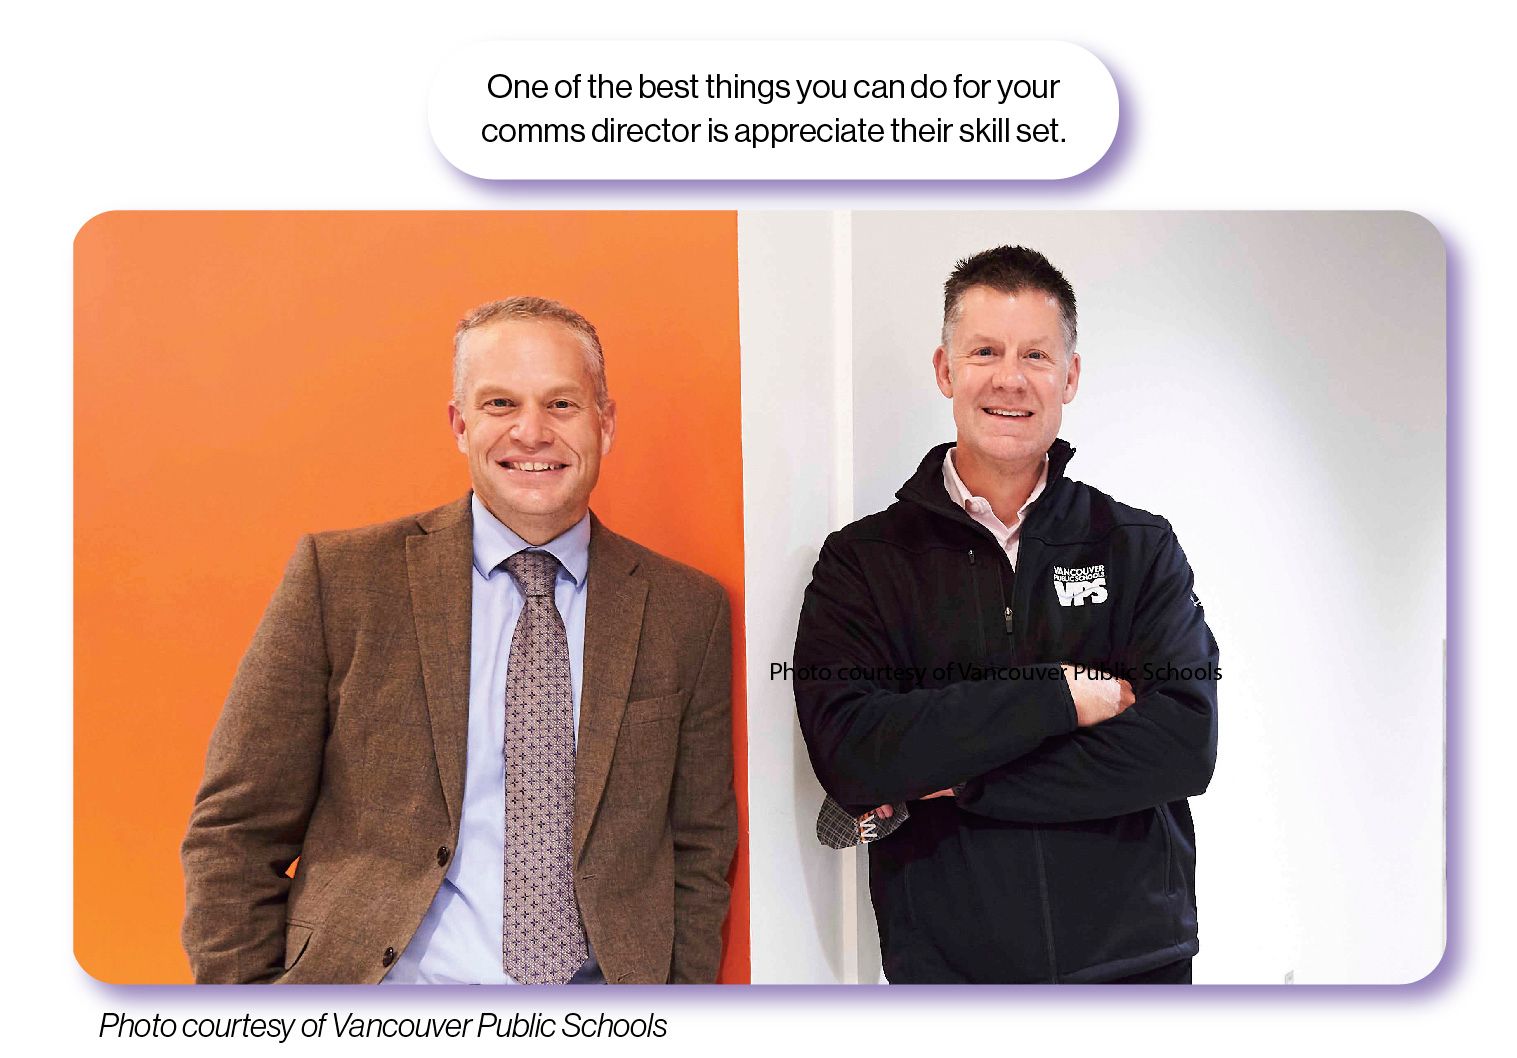 Image: Vancouver Public Schools Superintendent Jeff Snell and Chief Communications and Public Engagement Officer Tom Hagley, with the SchoolCEO caption 'One of the best things you can do for your comms director is appreciate their skill set.'